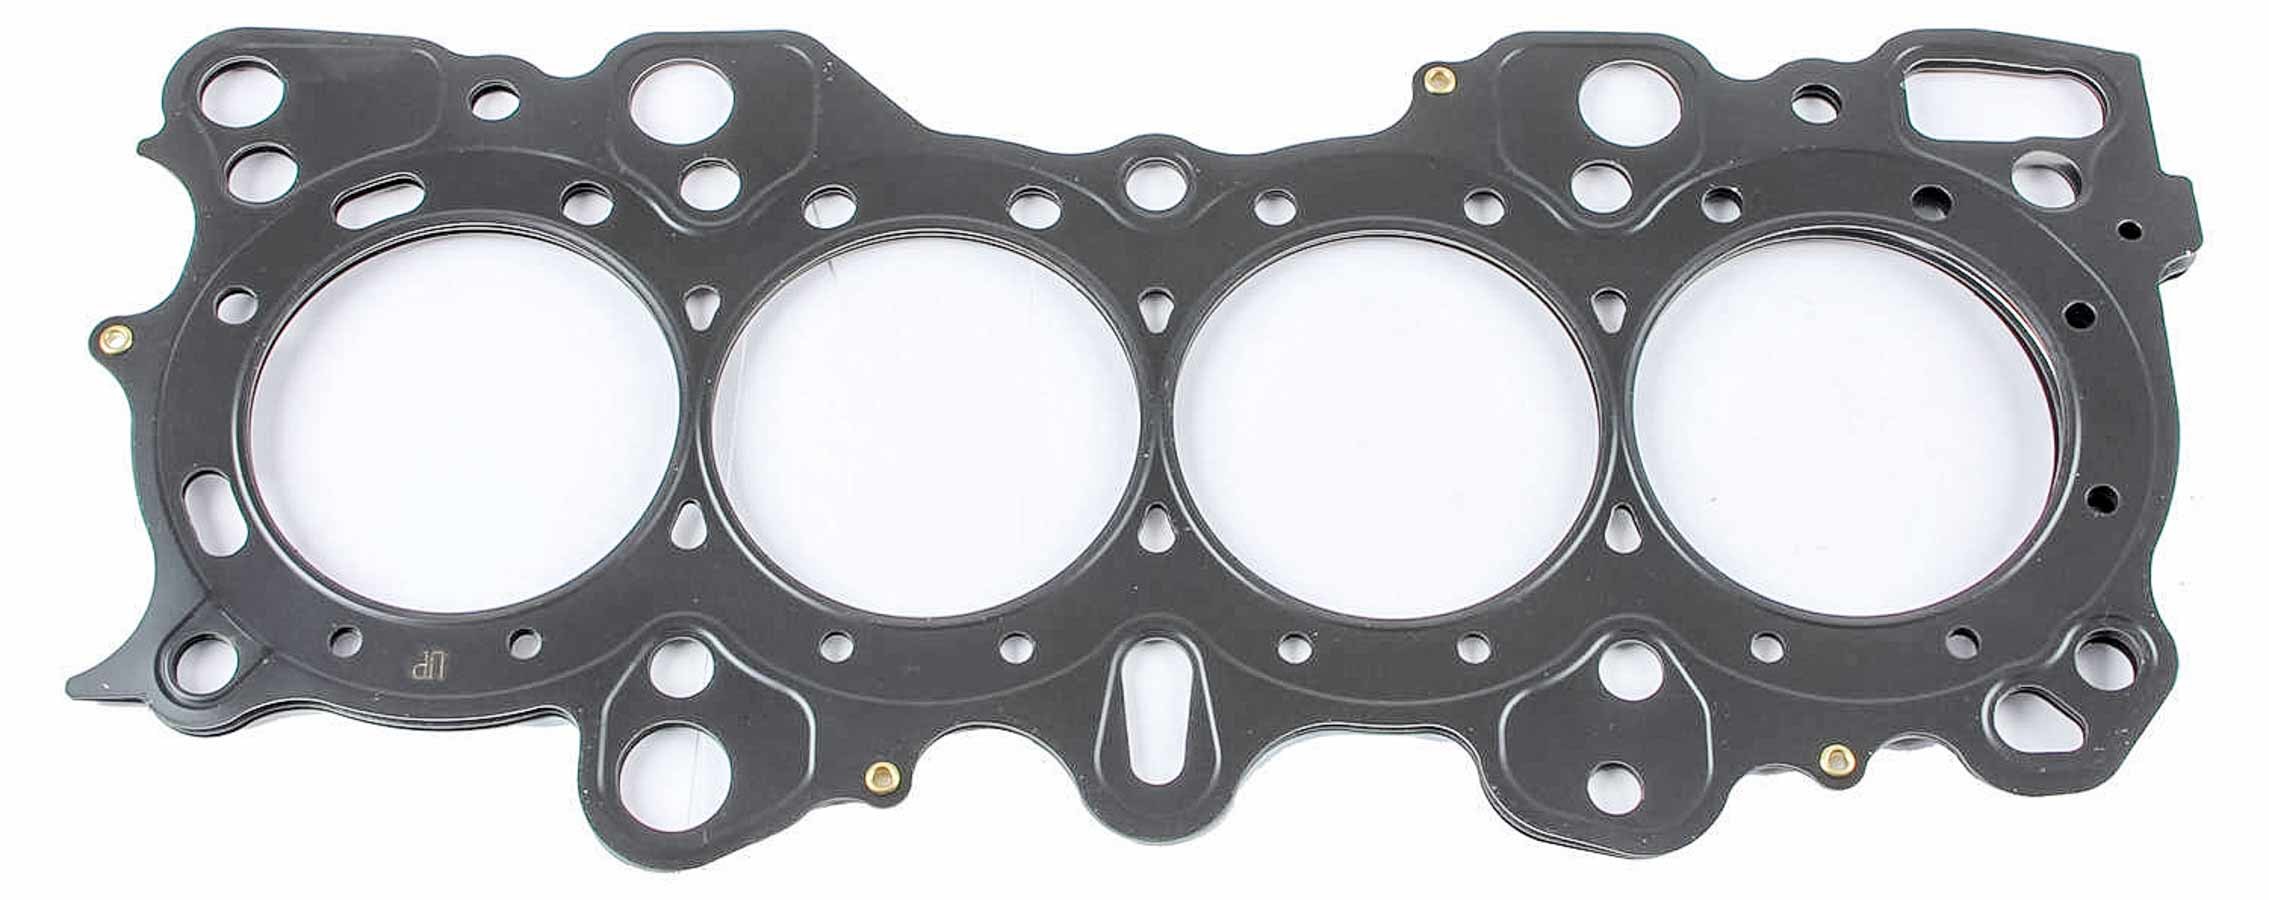 Cometic Gaskets C4191-030 Cylinder Head Gasket, 82.0 mm Bore, 0.030 in Compression Thickness, Multi-Layer Steel, Honda B-Series, Each